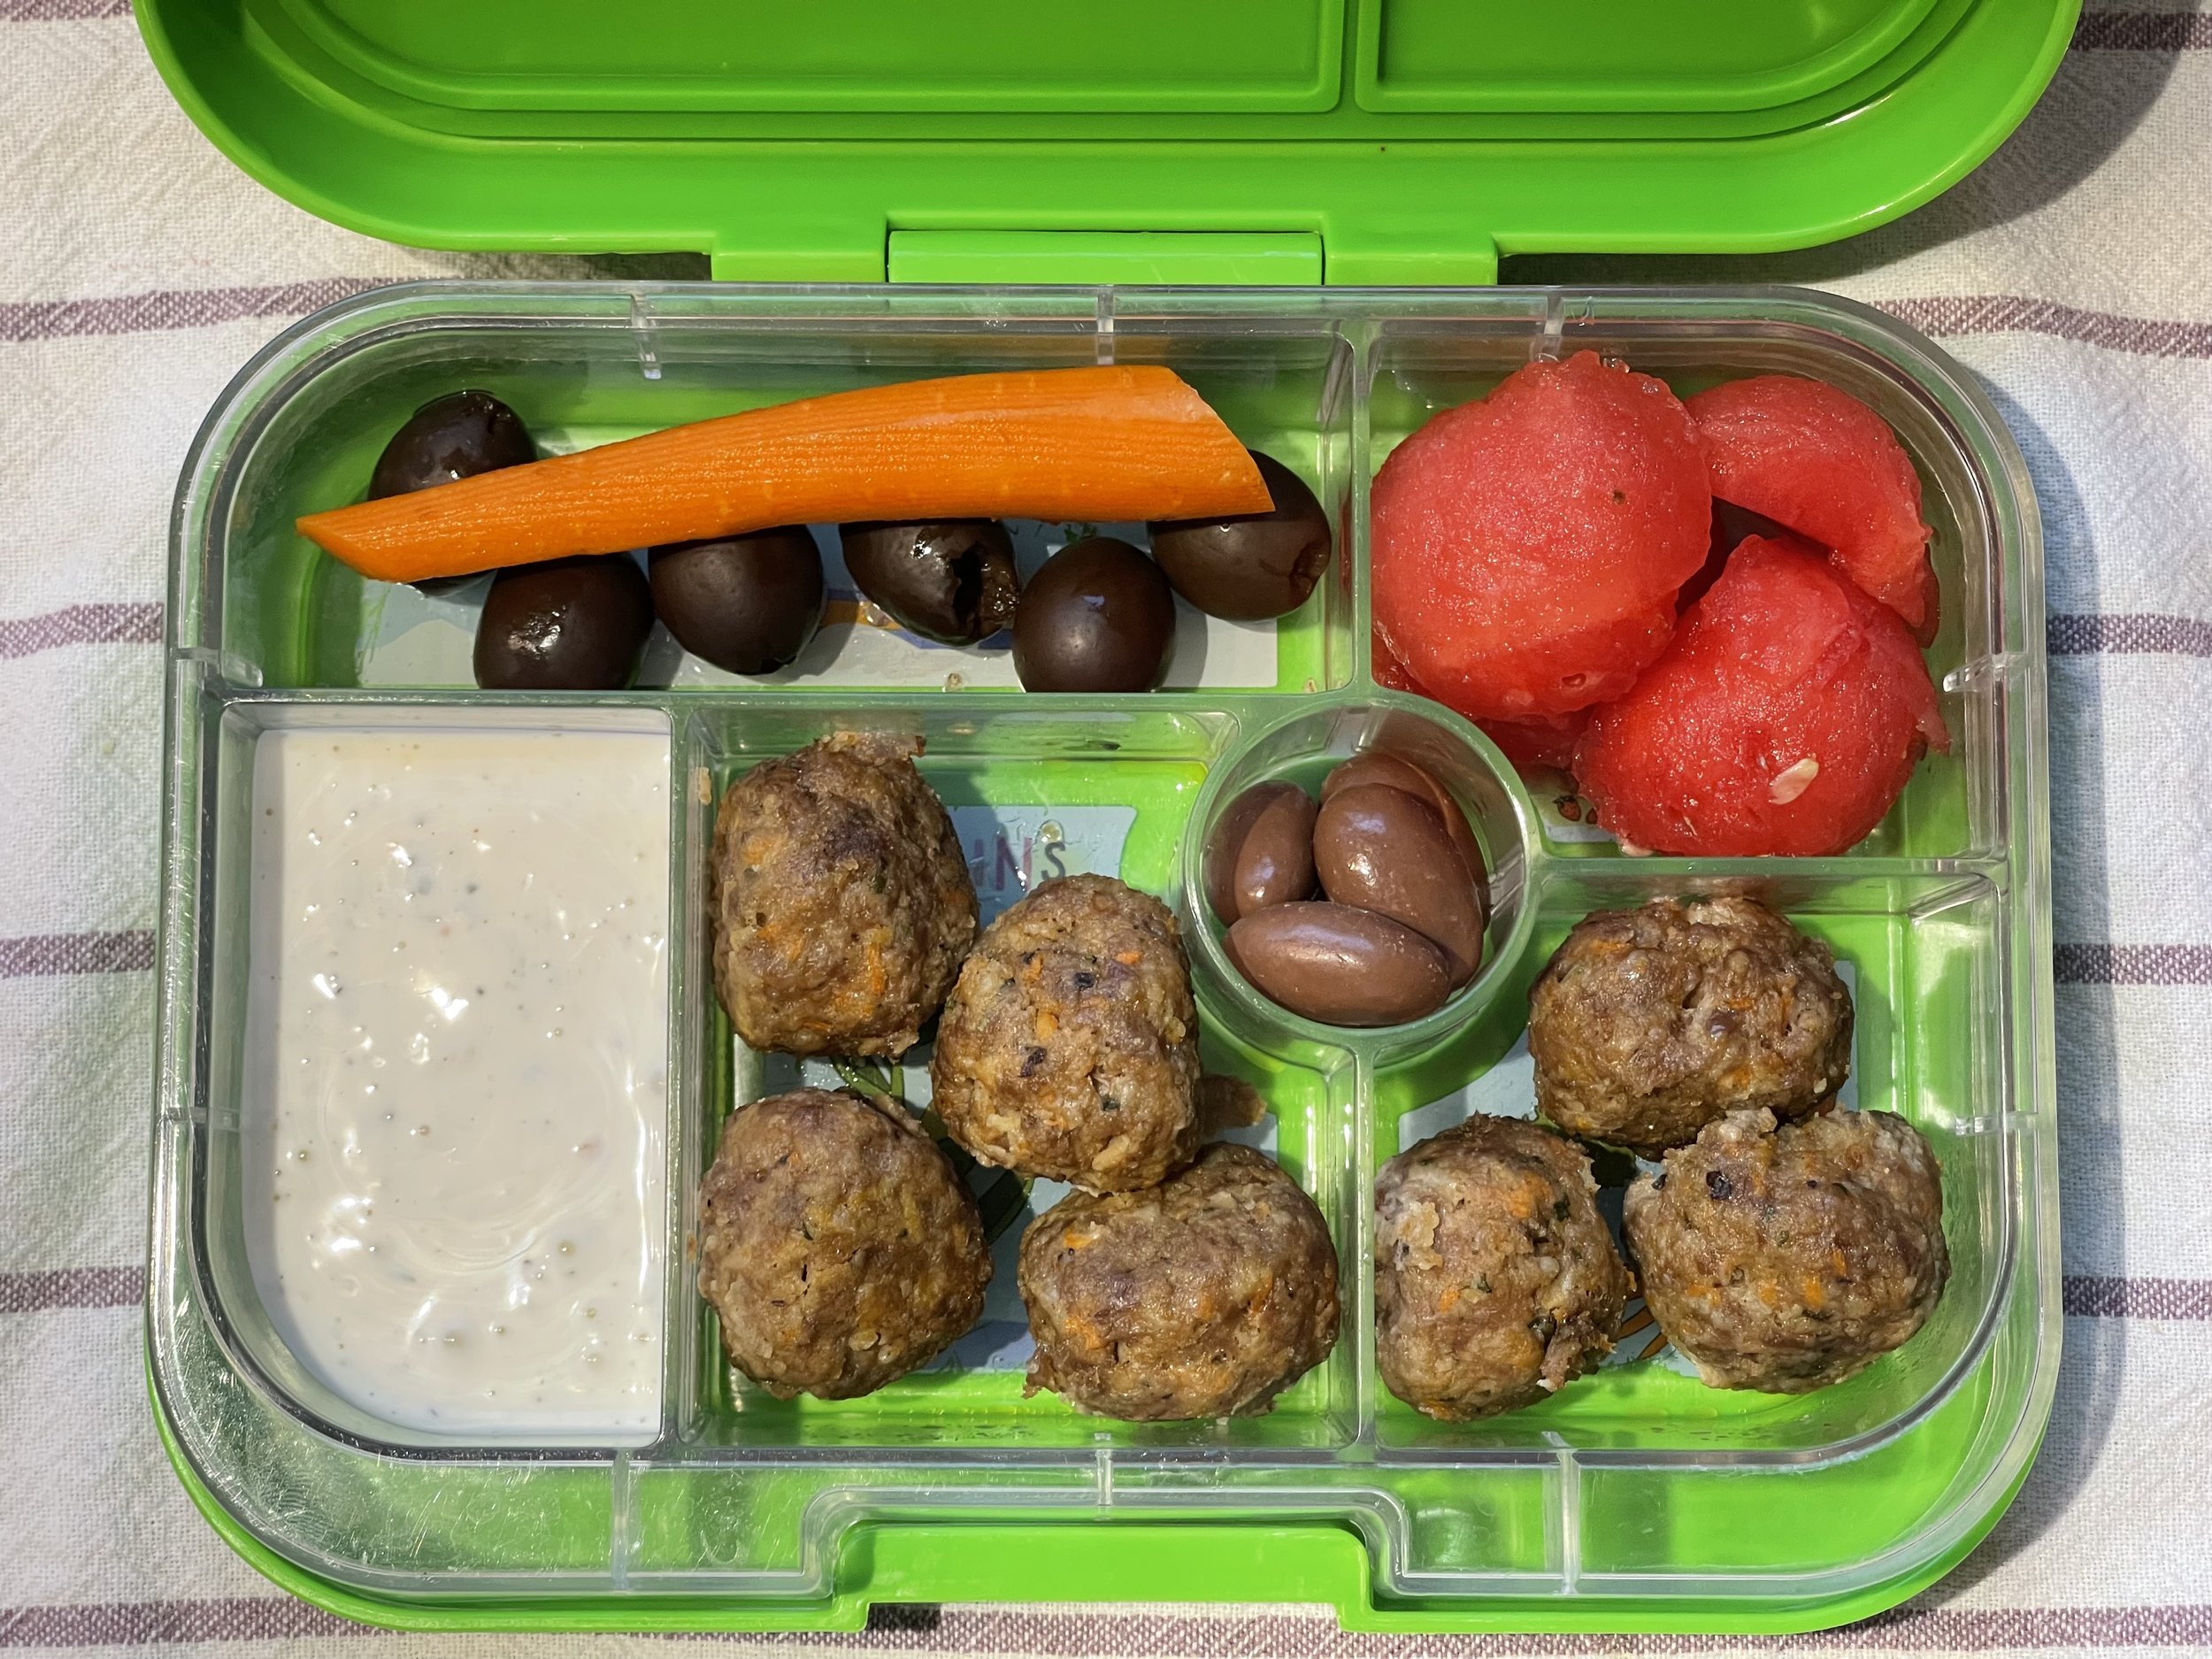 Need lunch ideas for kids? Try these using pasture-raised meat.